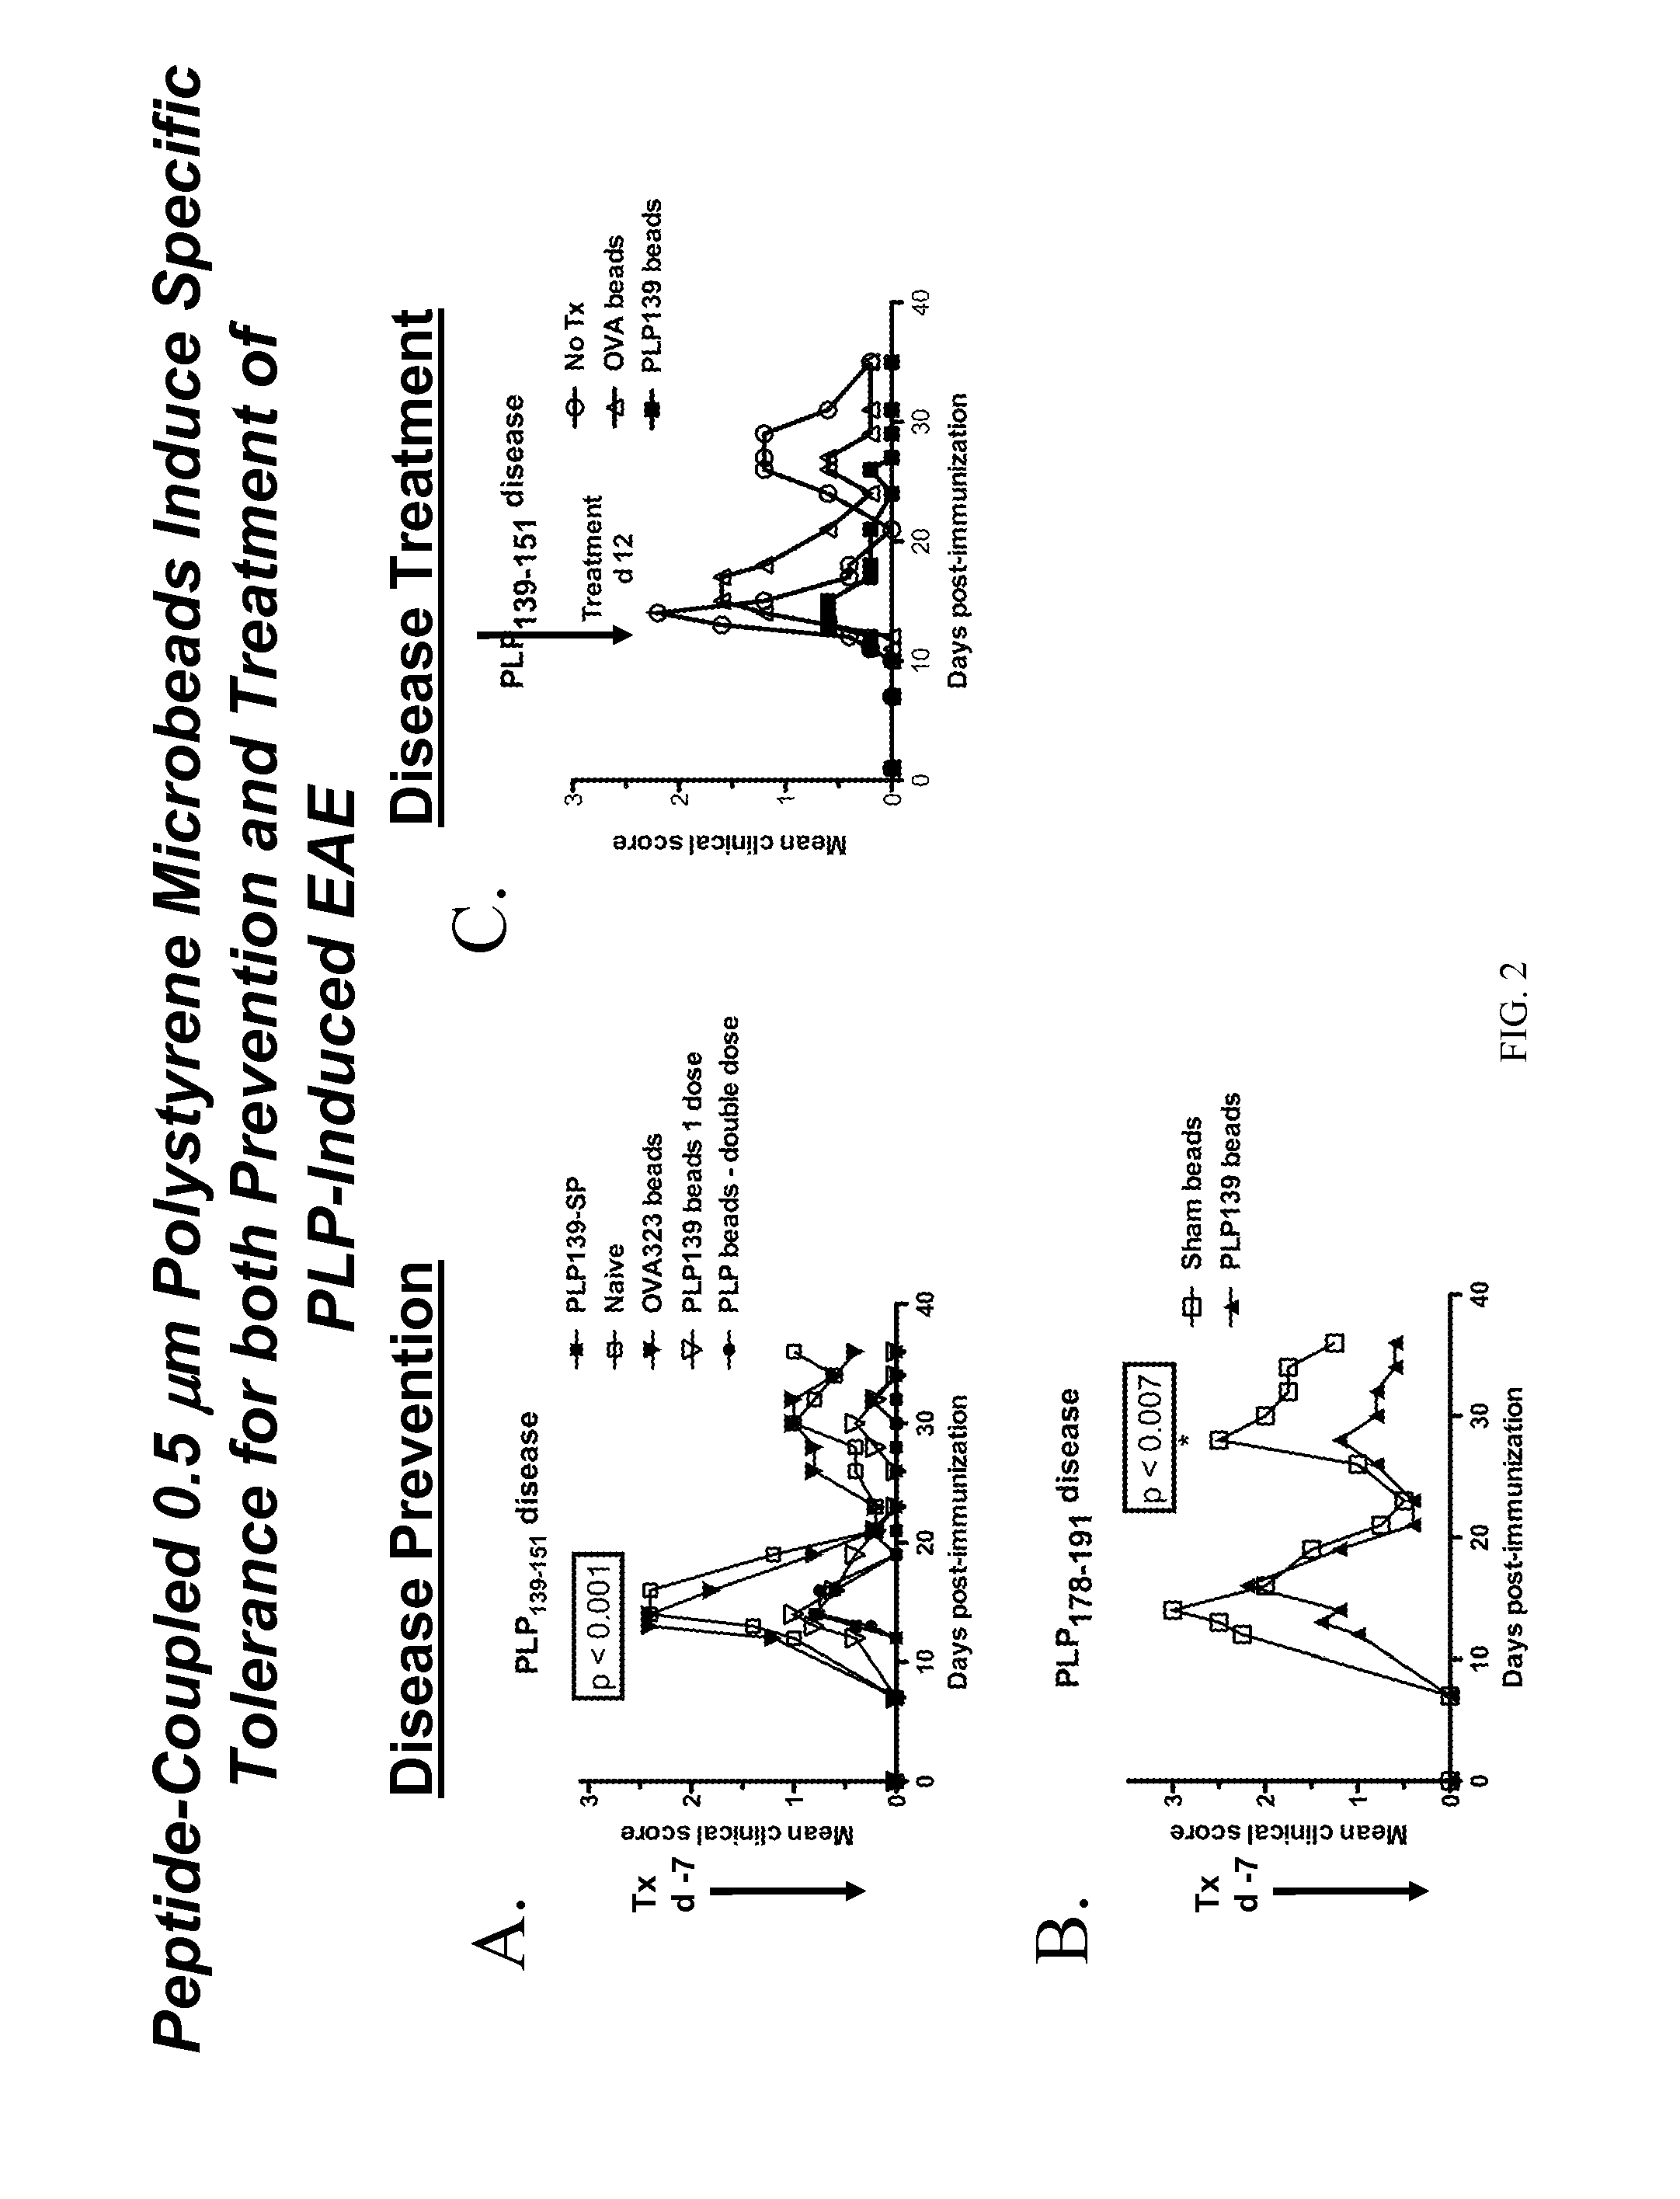 Compositions and methods for induction of antigen-specific tolerance